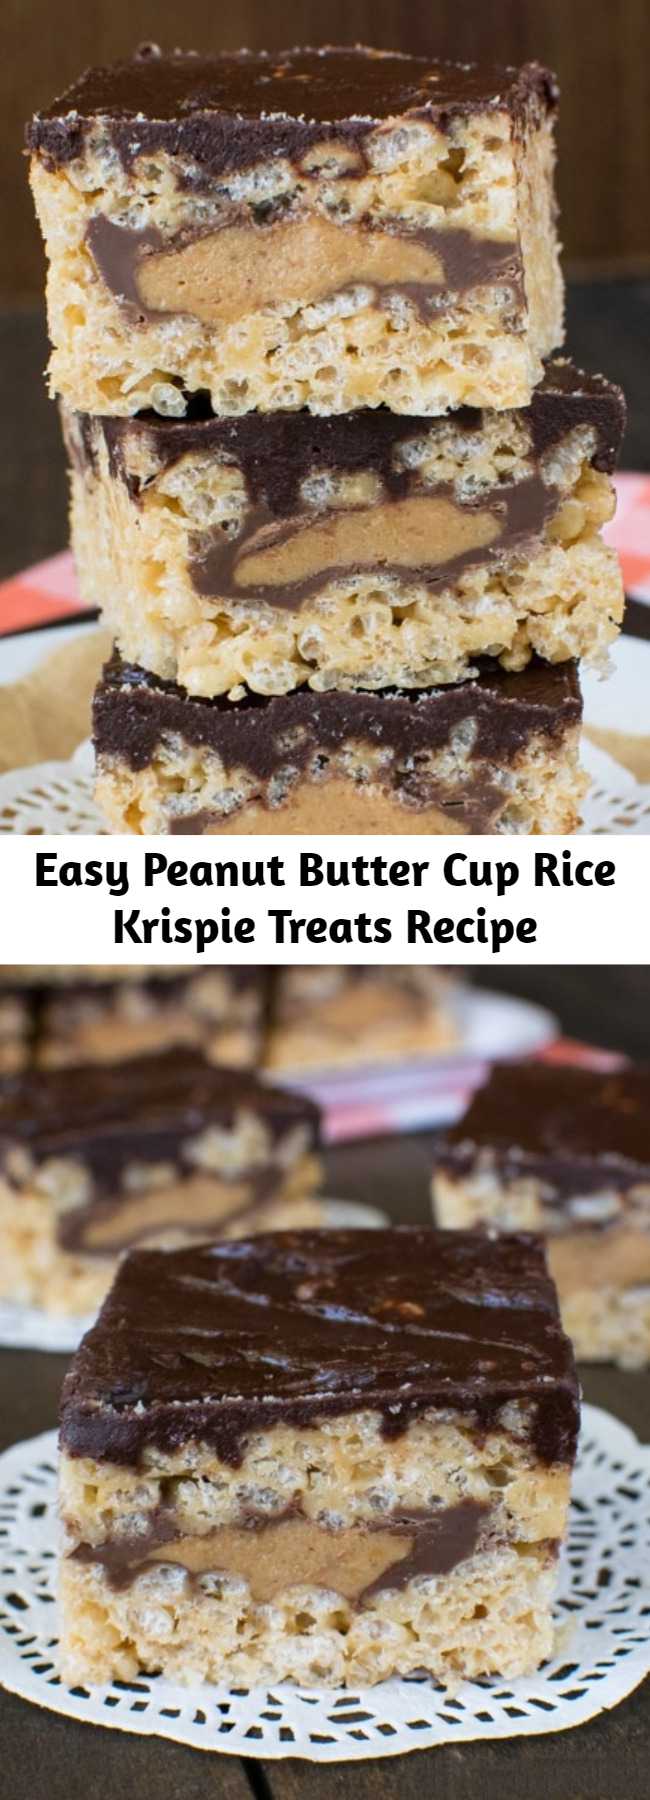 Easy Peanut Butter Cup Rice Krispie Treats Recipe - A layer of candy bars and chocolate make these Peanut Butter Cup Rice Krispie Treats the best no bake treats you will ever have. These will not last long when you bring them to picnics or barbecues.